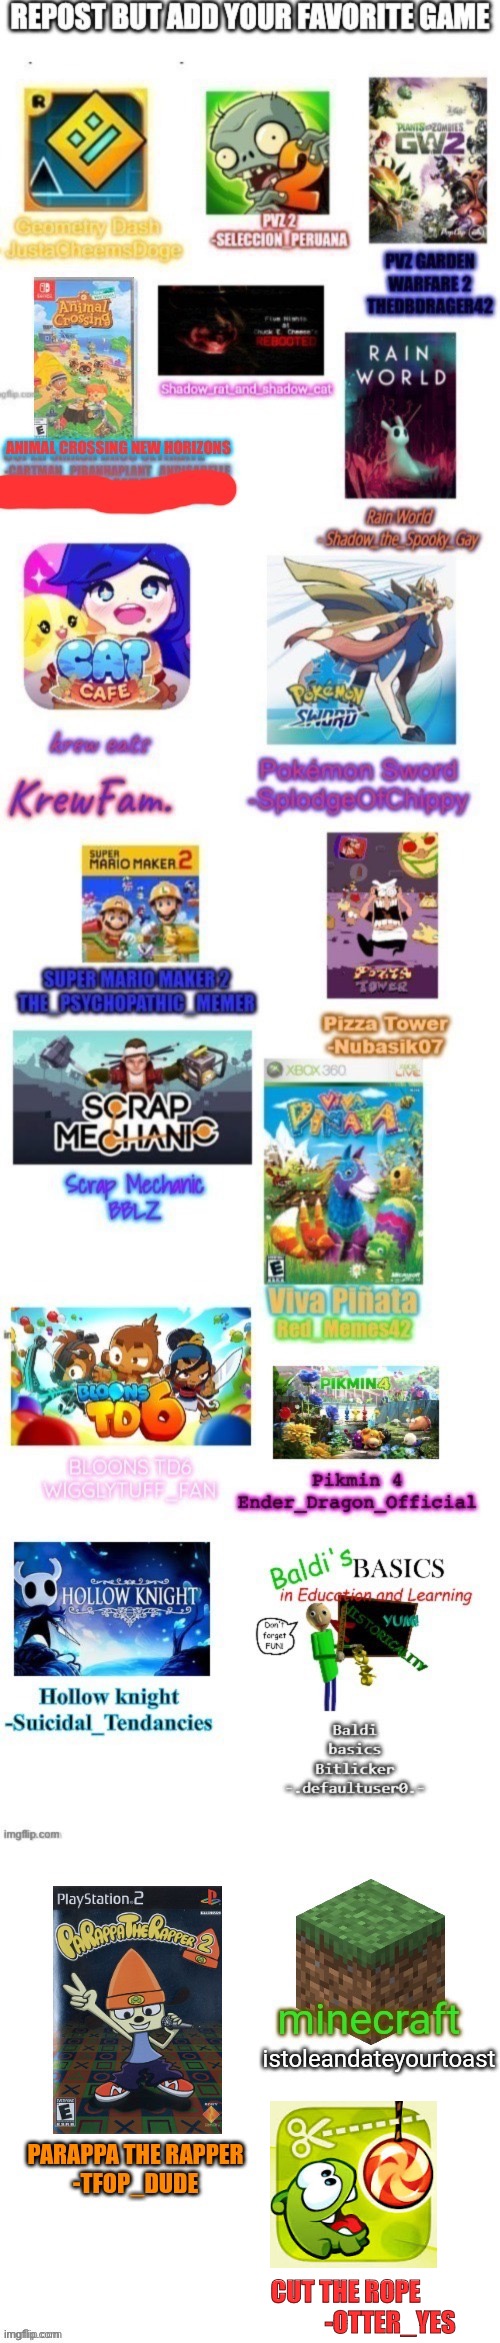 Repost and add your favorite game | CUT THE ROPE                   -OTTER_YES | image tagged in repost | made w/ Imgflip meme maker